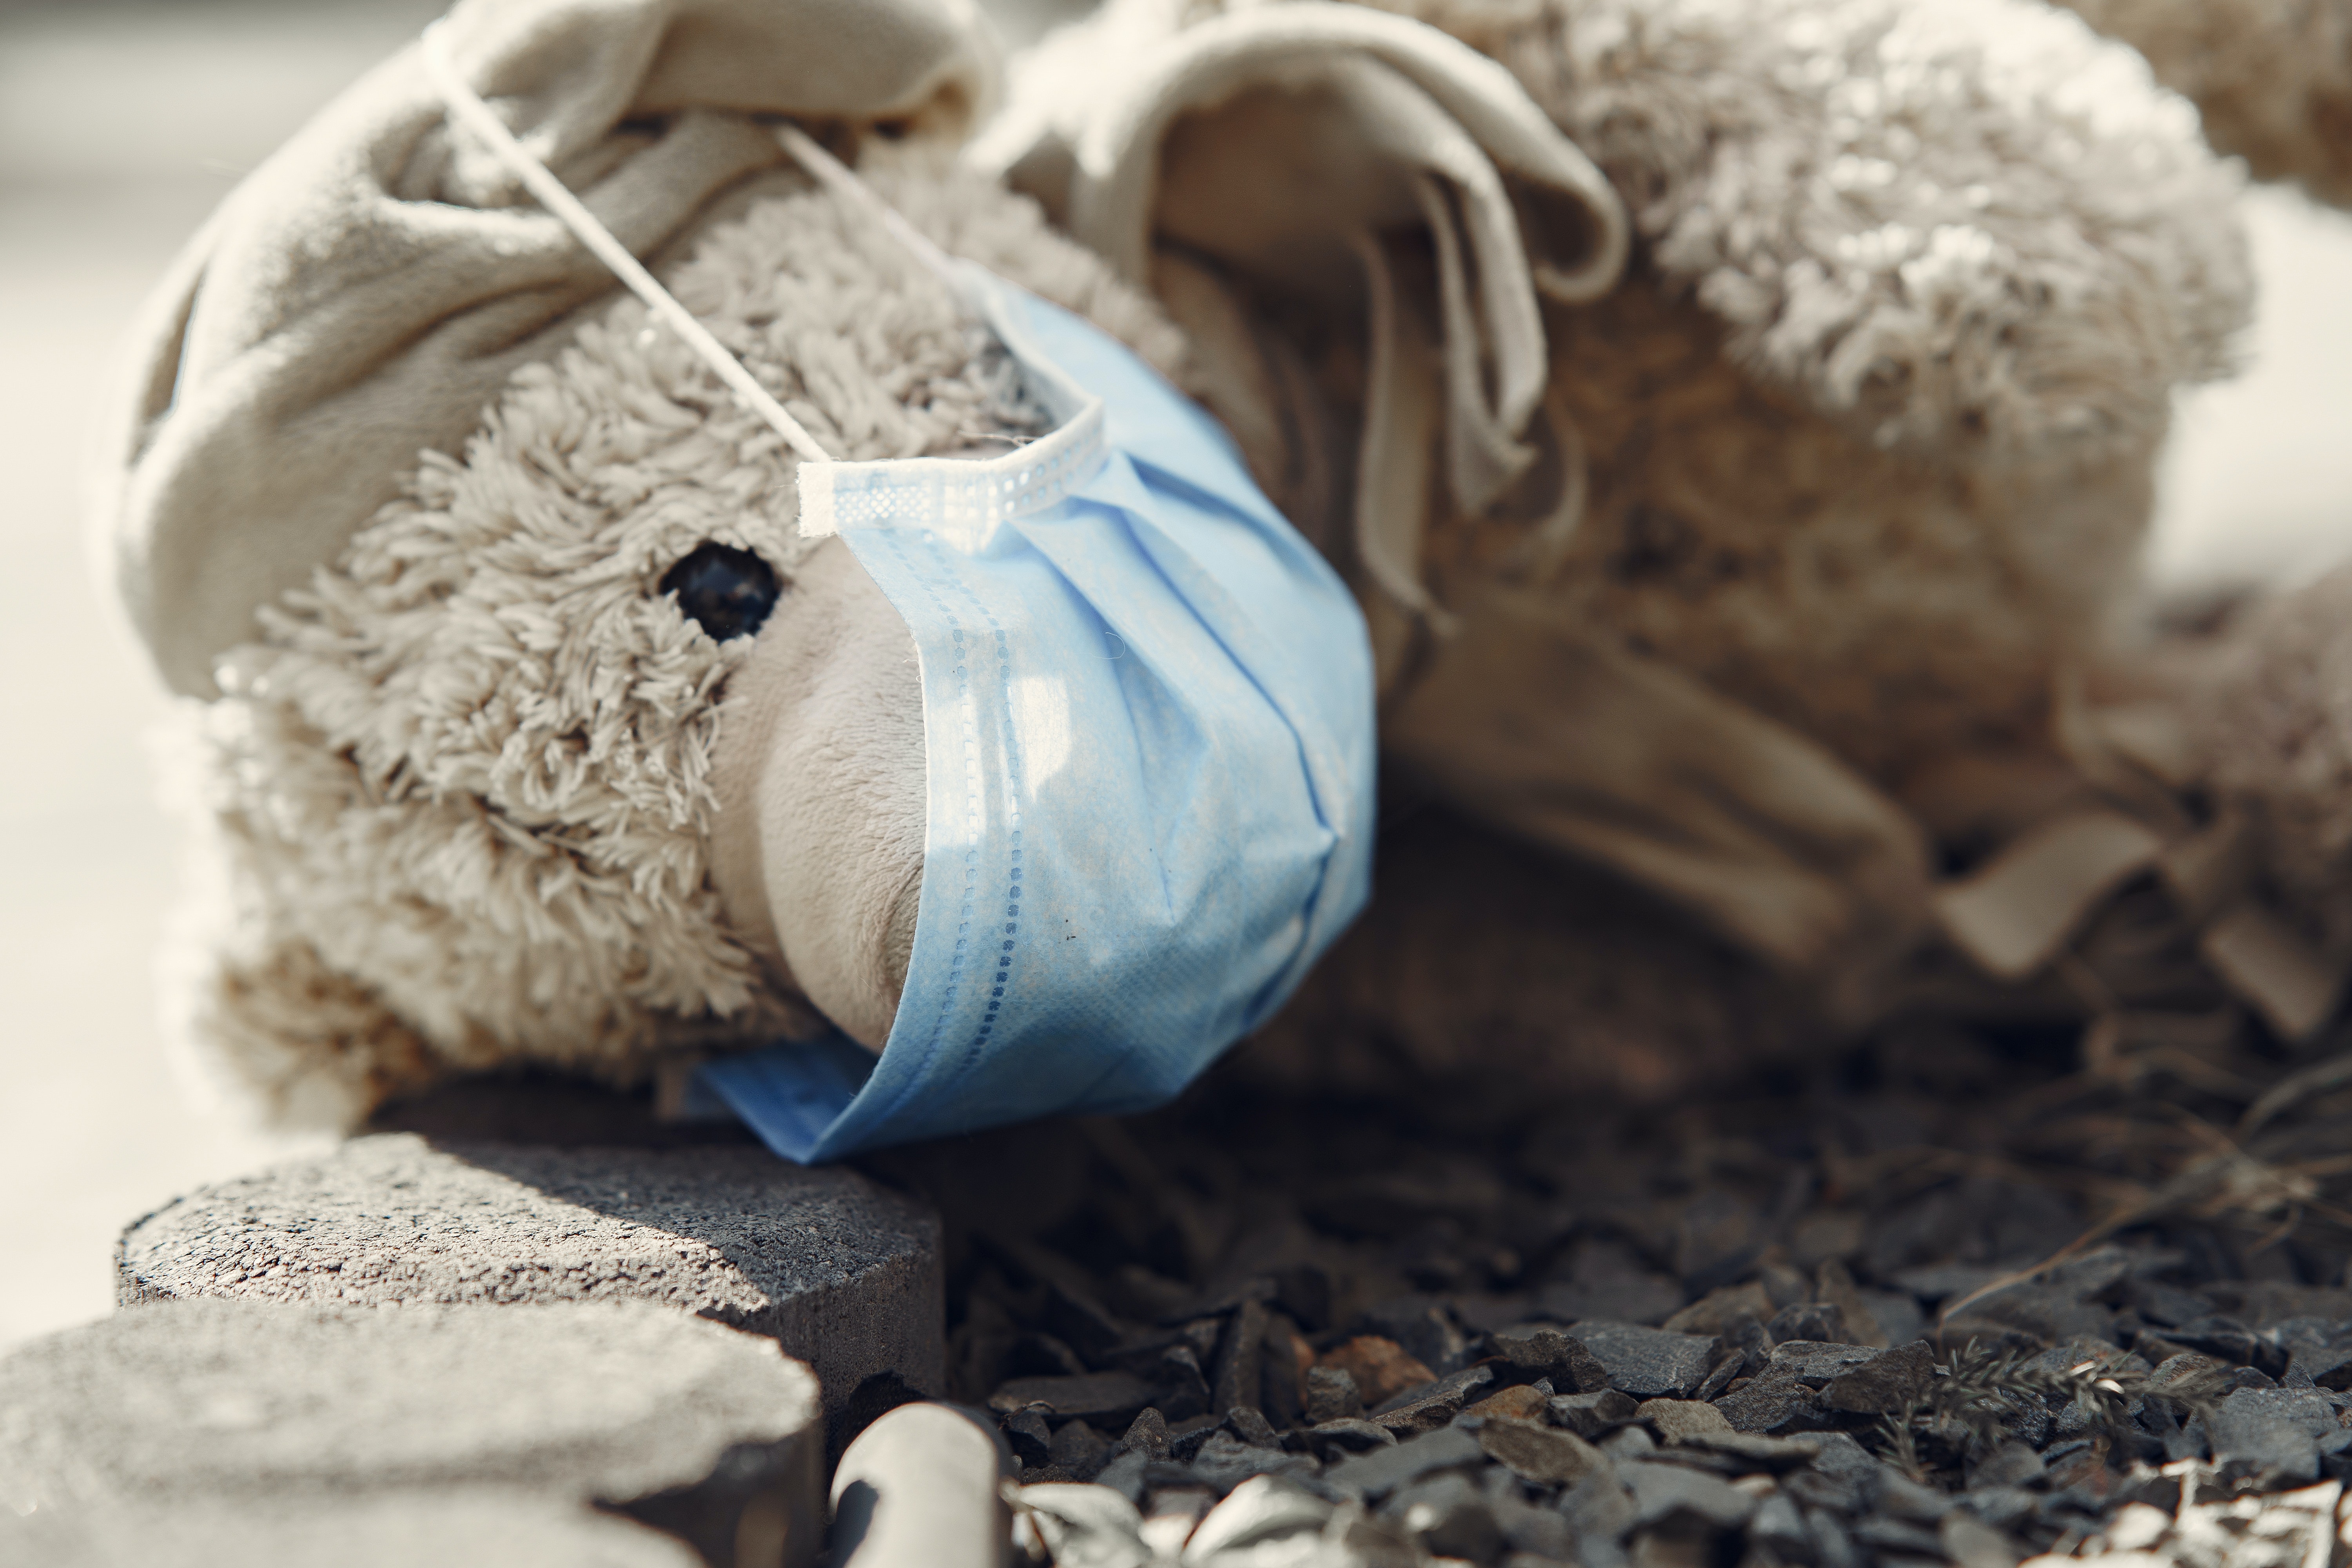 Stuffed animal bear with a COVID-19 mask, laying on the ground